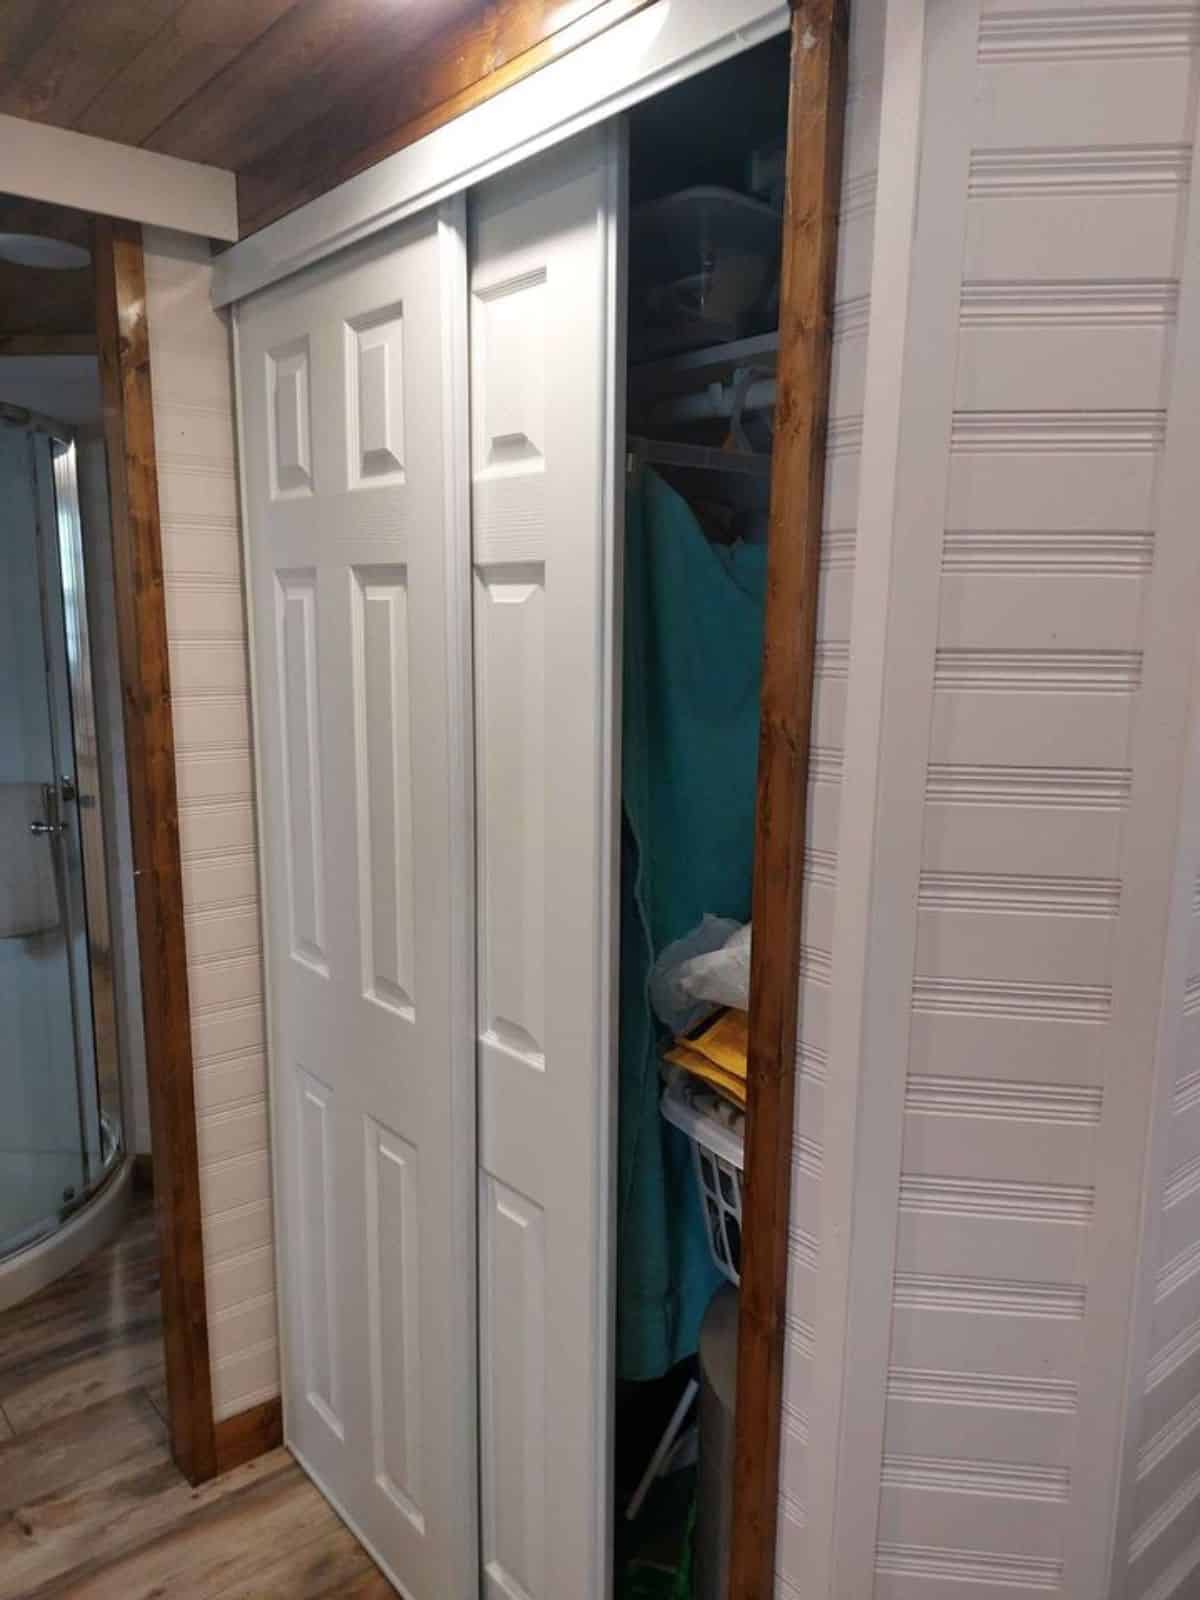 Full length closet right opposite to kitchen area